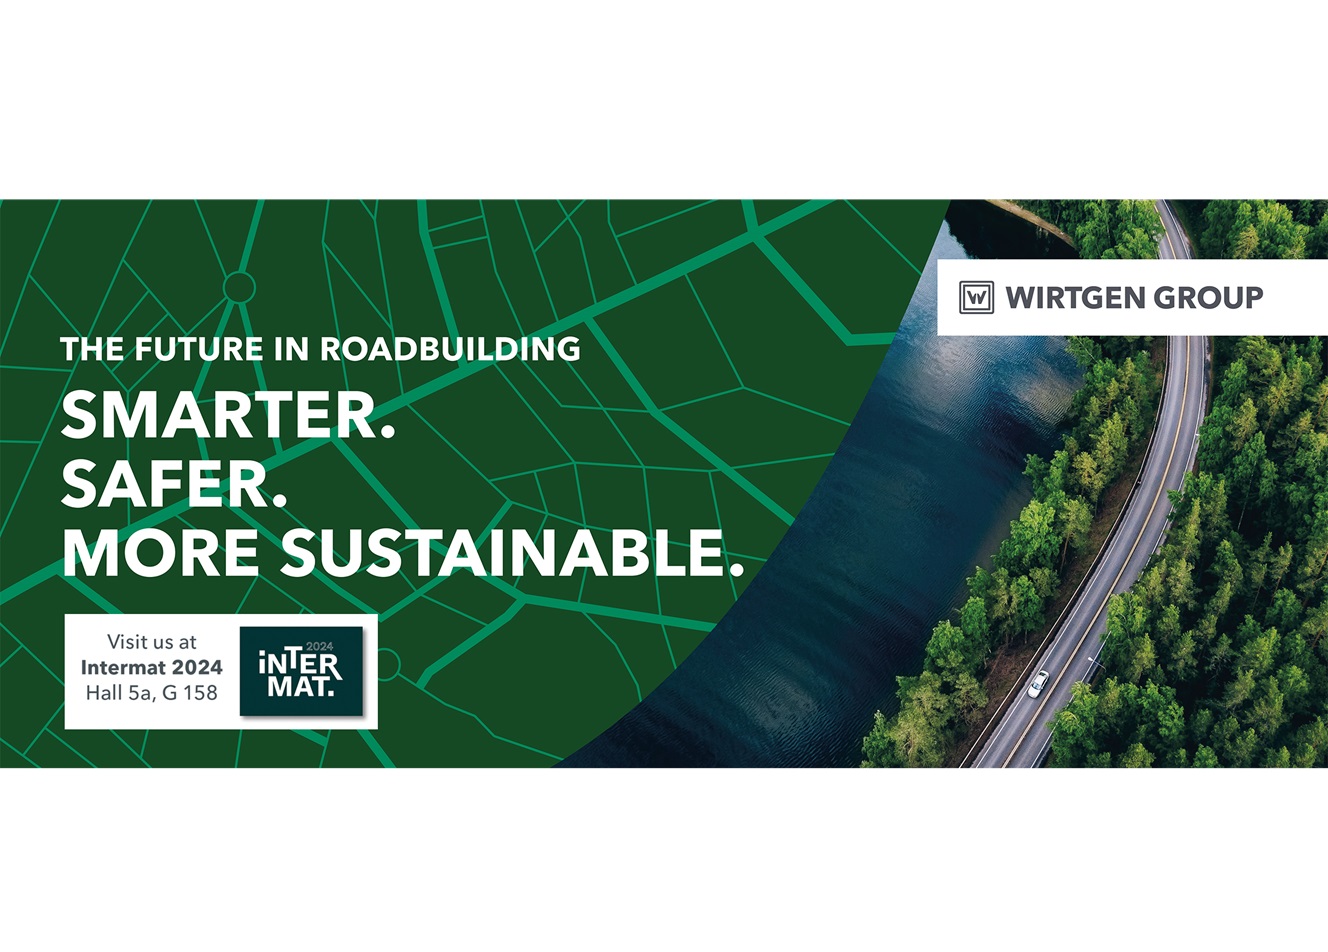 The Wirtgen Group’s appearance at Intermat 2024 focuses on environmentally-compatible technologies, solutions and applications that contribute to the reduction of CO2 emissions in road construction. 